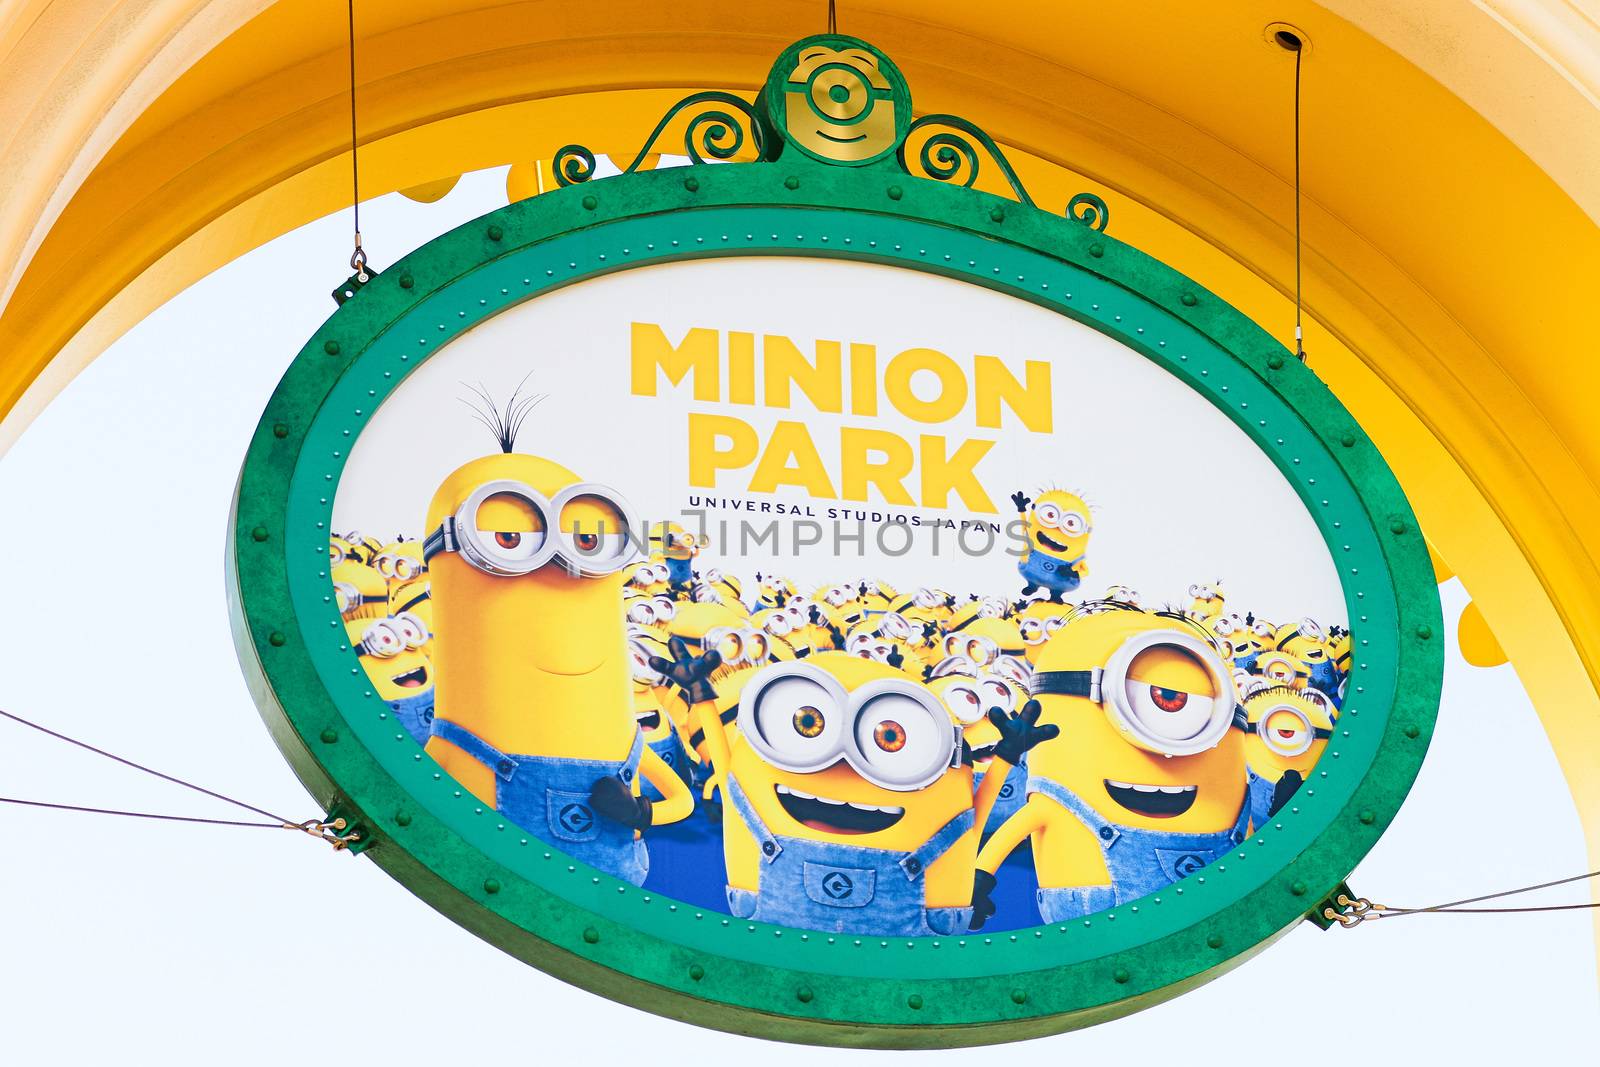 The minion Park Sign was introduced on the Universal Studios JAPAN by USA-TARO